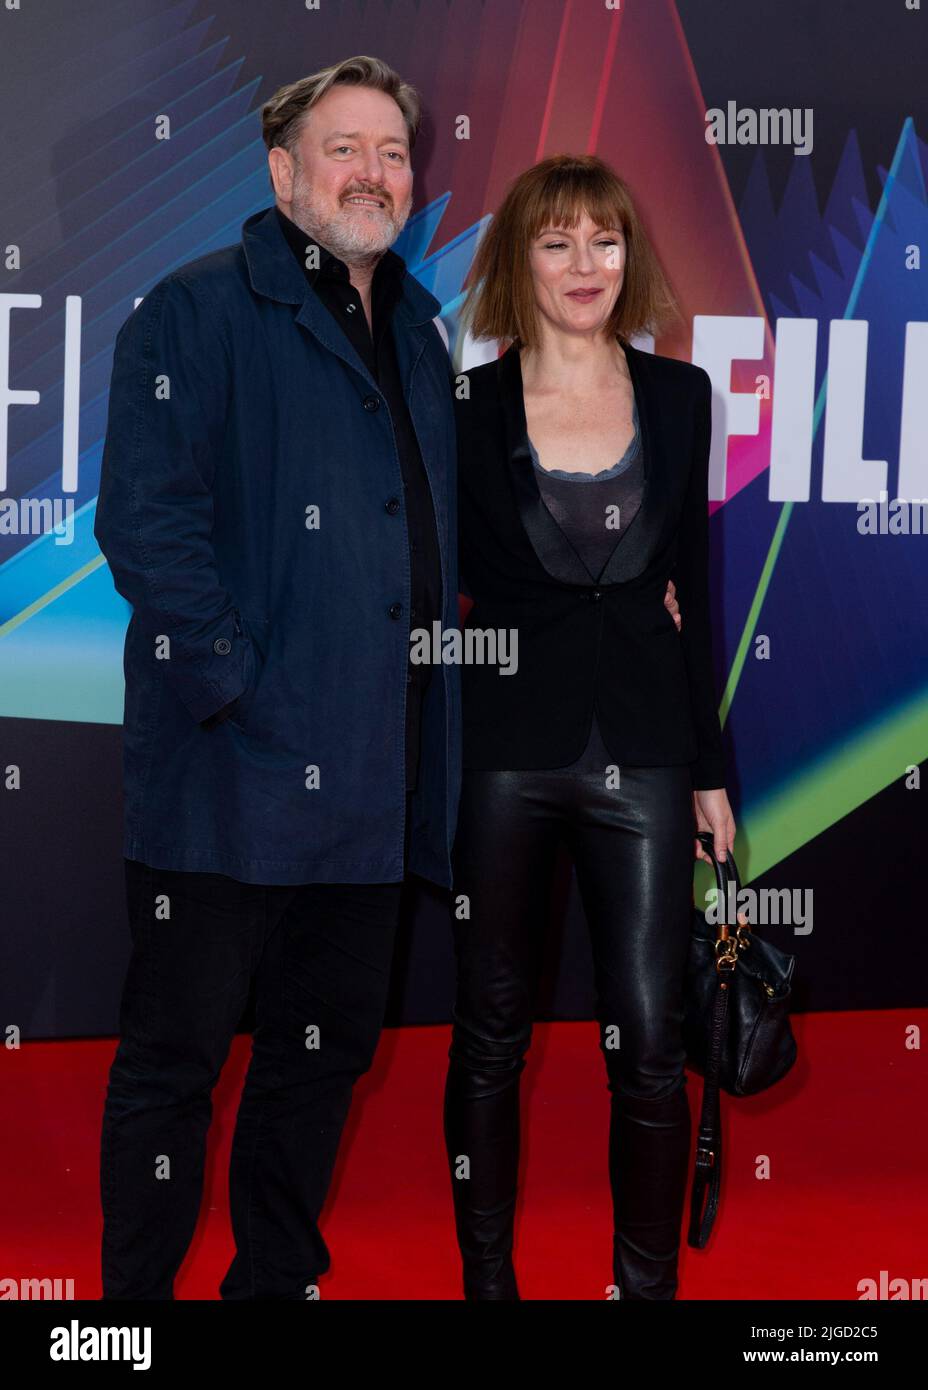 The BFI 65th London Film Festival UK Premiere of 'Last Night In Soho' held at the Royal Festival Hall, Southbank - Arrivals Featuring: Guy Garvey, Rachael Stirling Where: London, United Kingdom When: 09 Oct 2021 Credit: Mario Mitsis/WENN Stock Photo